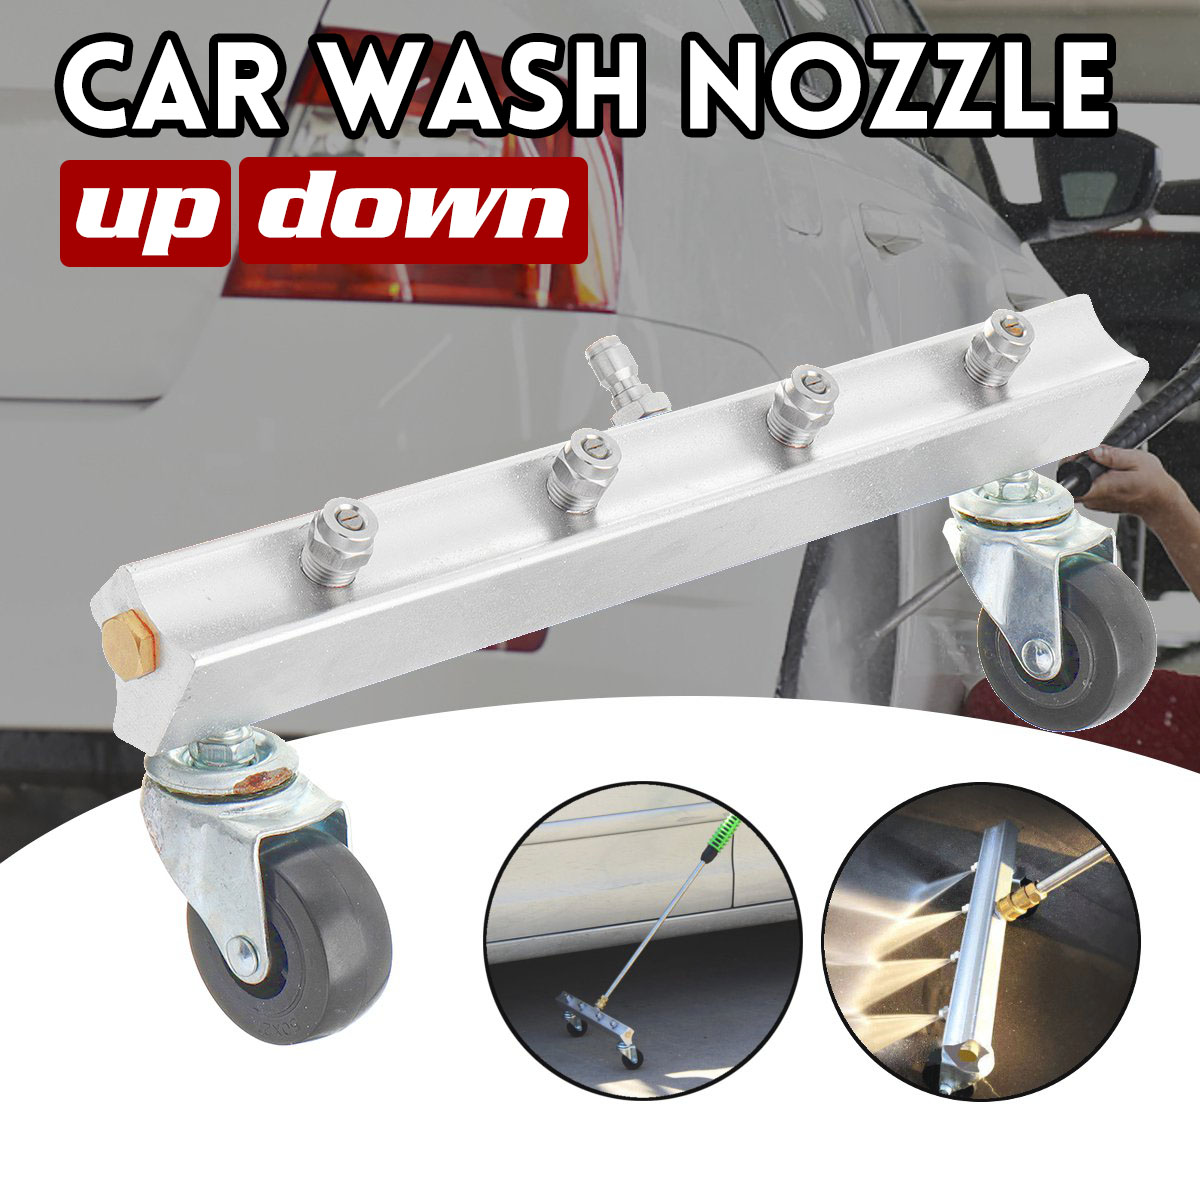 Multi-function-Car-Wash-Nozzle-Factory-Home-UpDown-Washing-Machine-14-insert-1422311-1